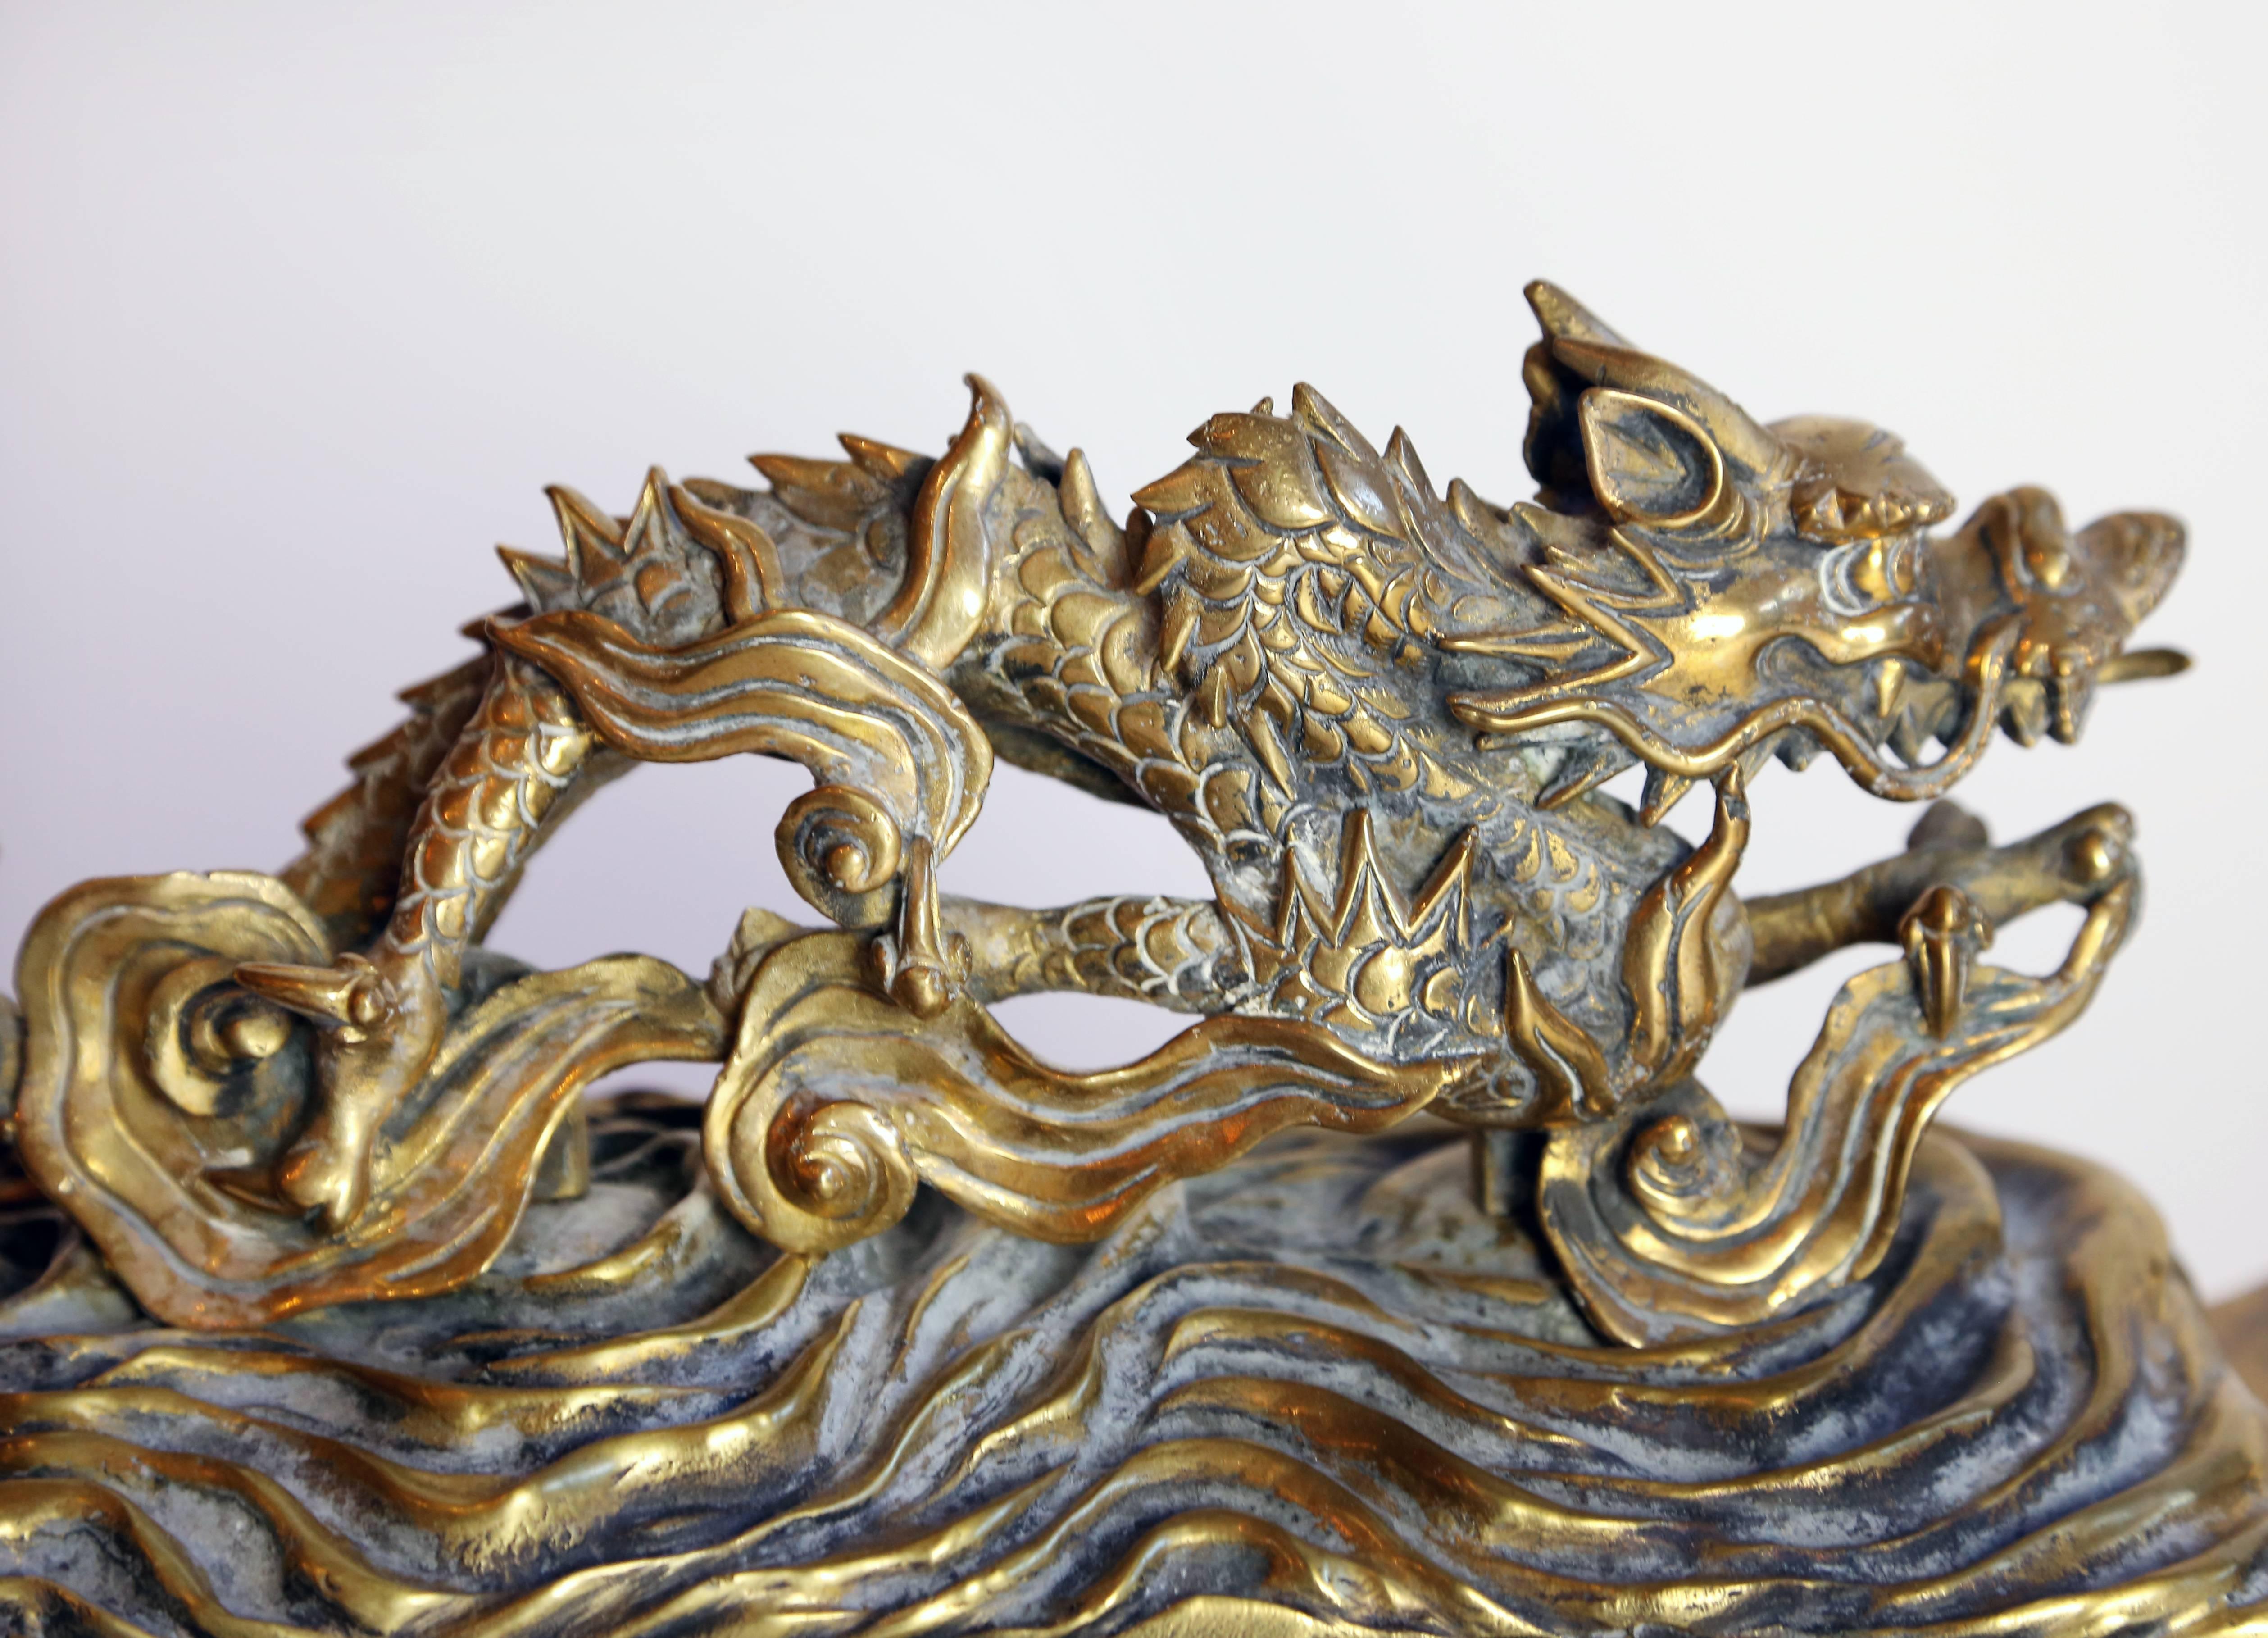 Fanciful French dragon adorned chenets on a rectangular base with a pierced foliate footed base and a pagoda style detail at the top.